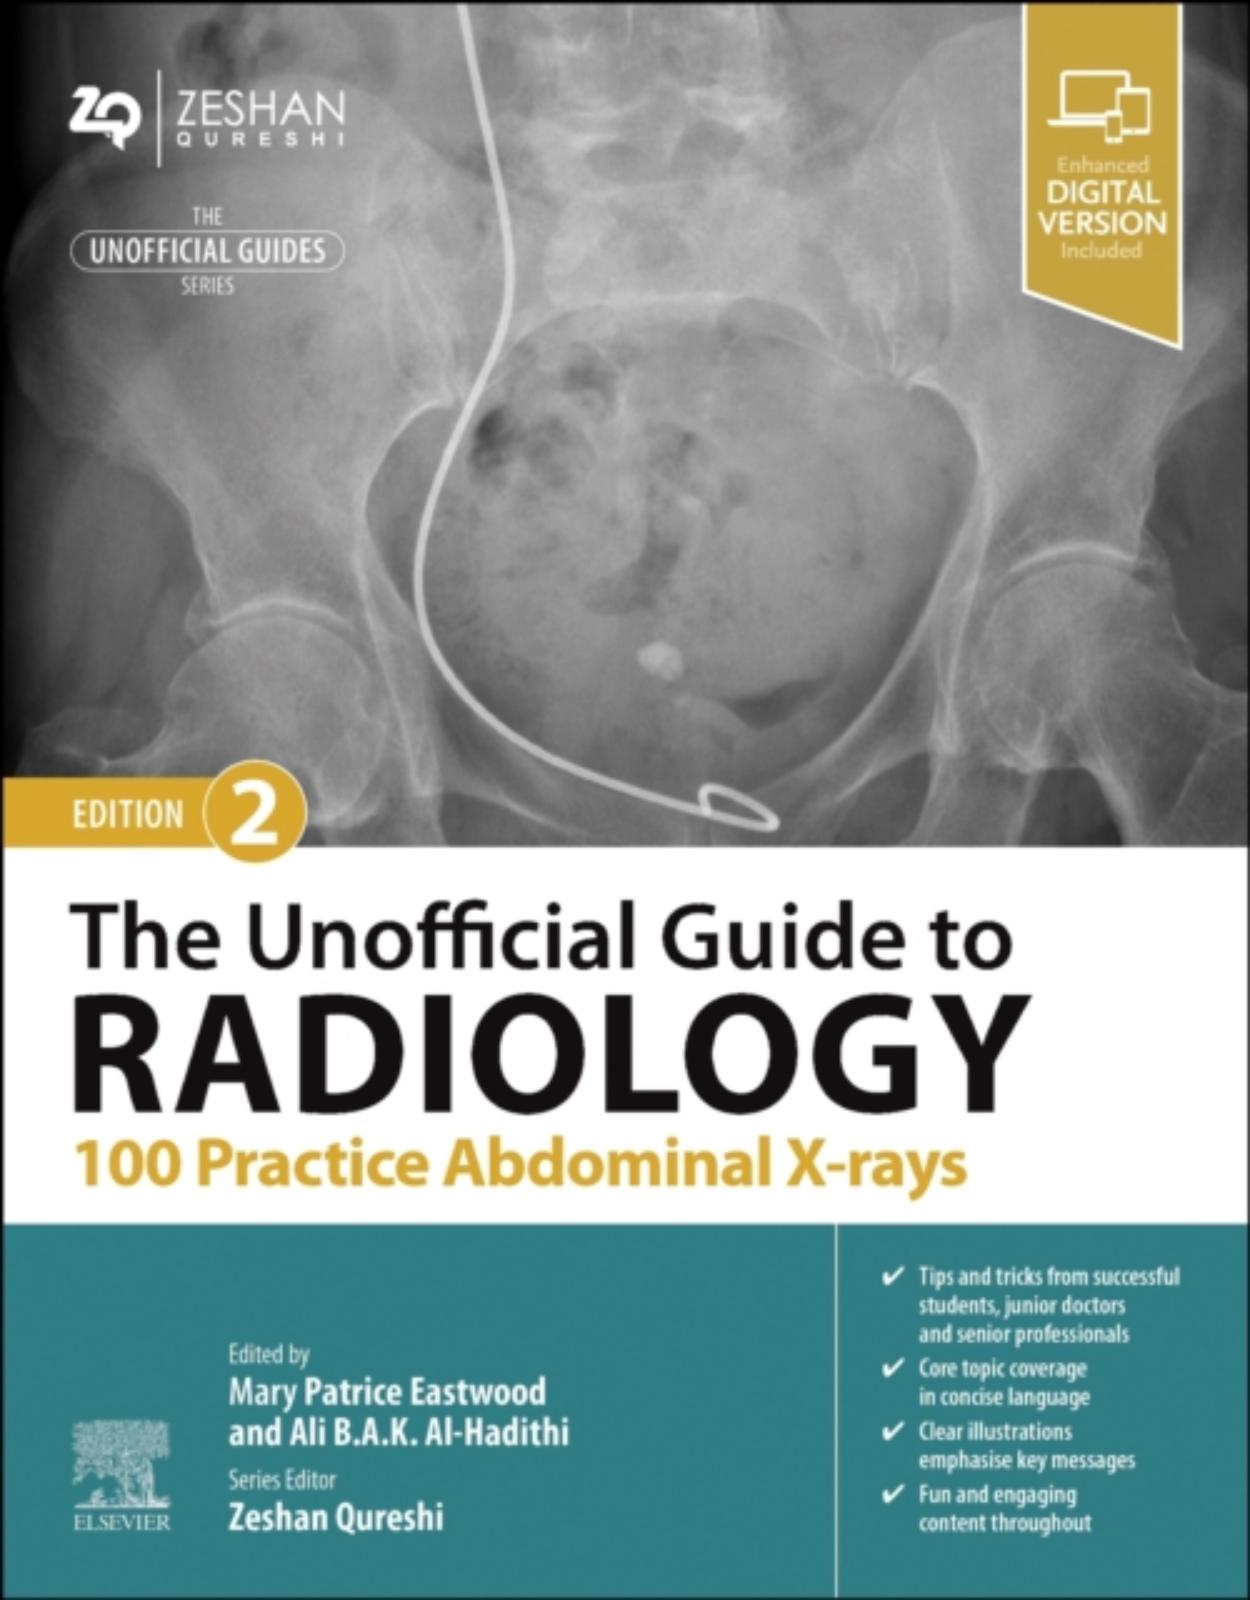 The Unofficial Guide to Radiology: 100 Practice Abdominal X-rays 